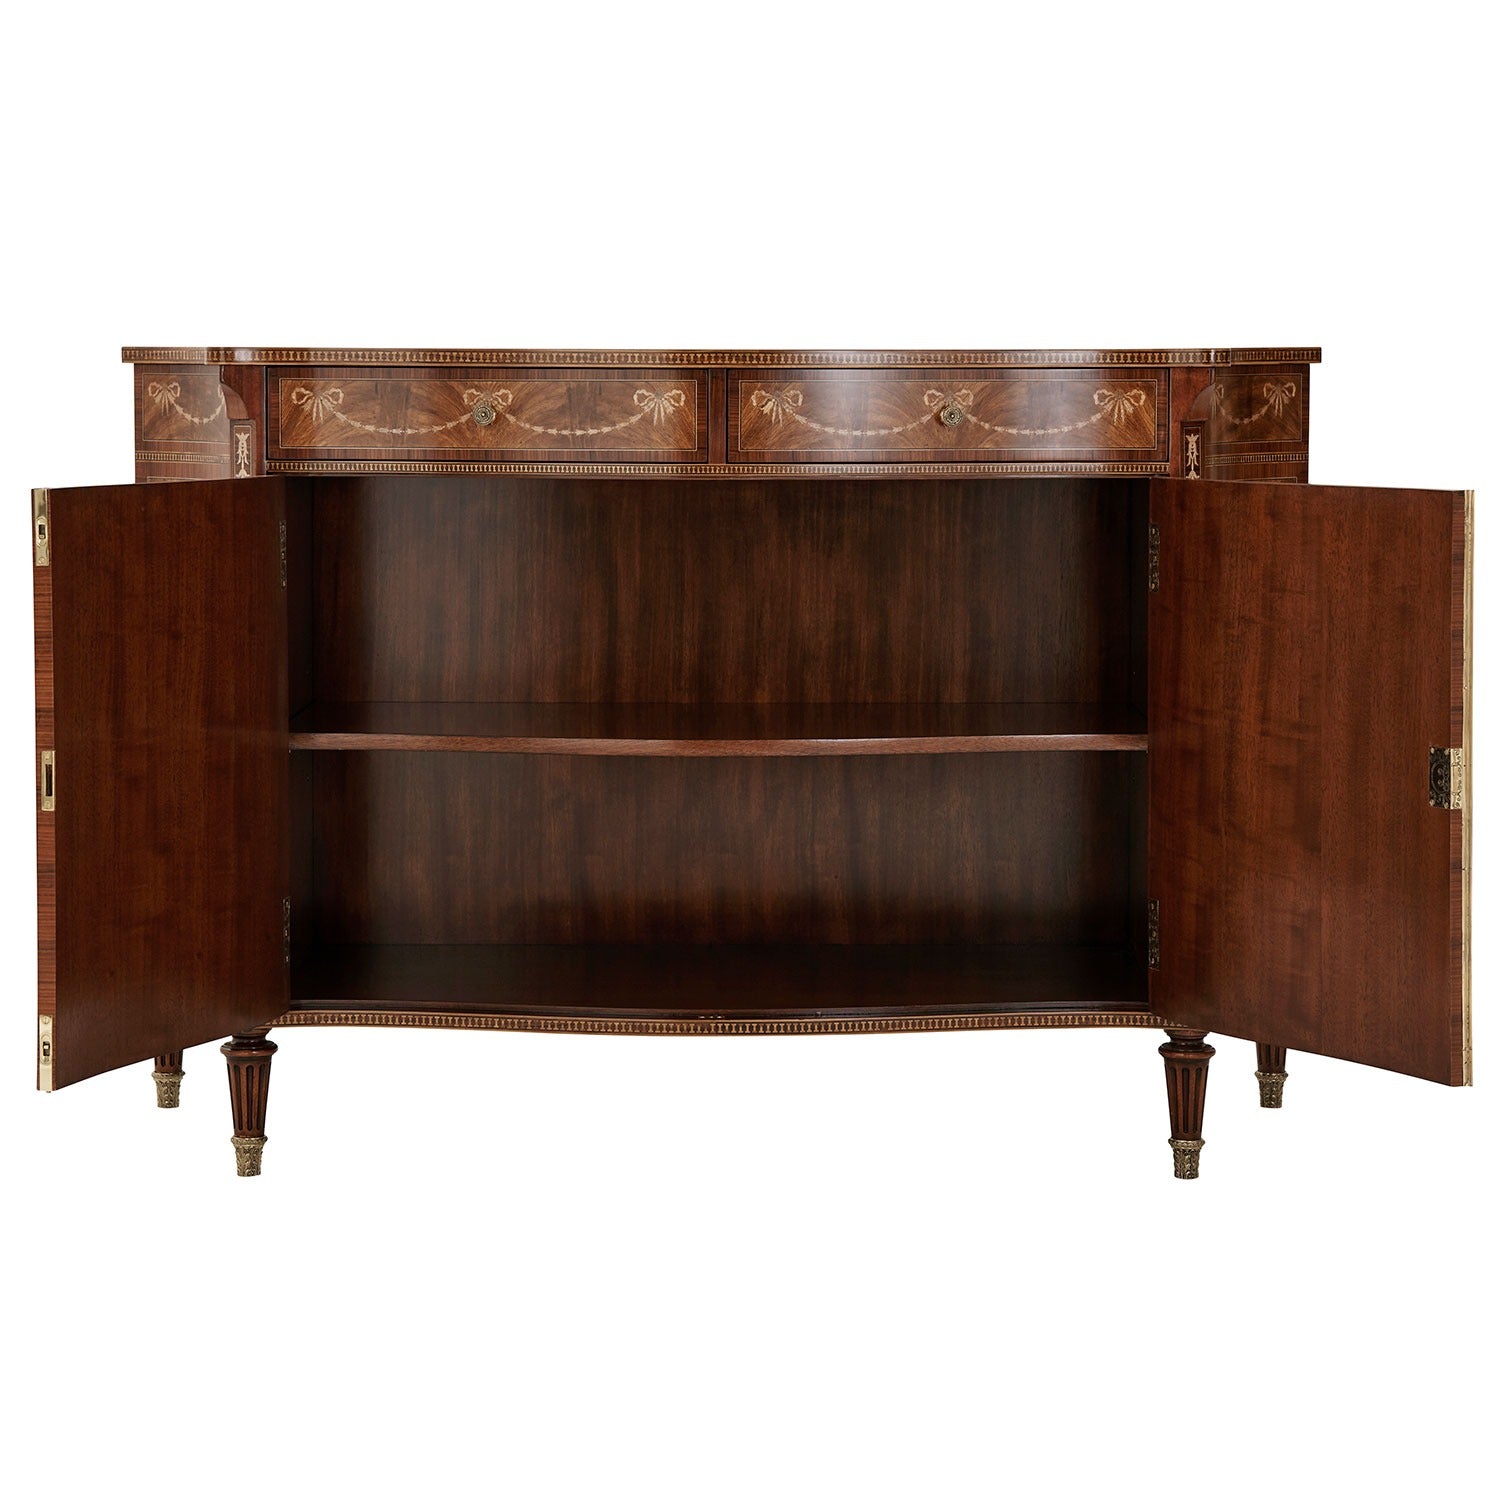 Neoclassical Style Chest with Fine Marquetry Detail